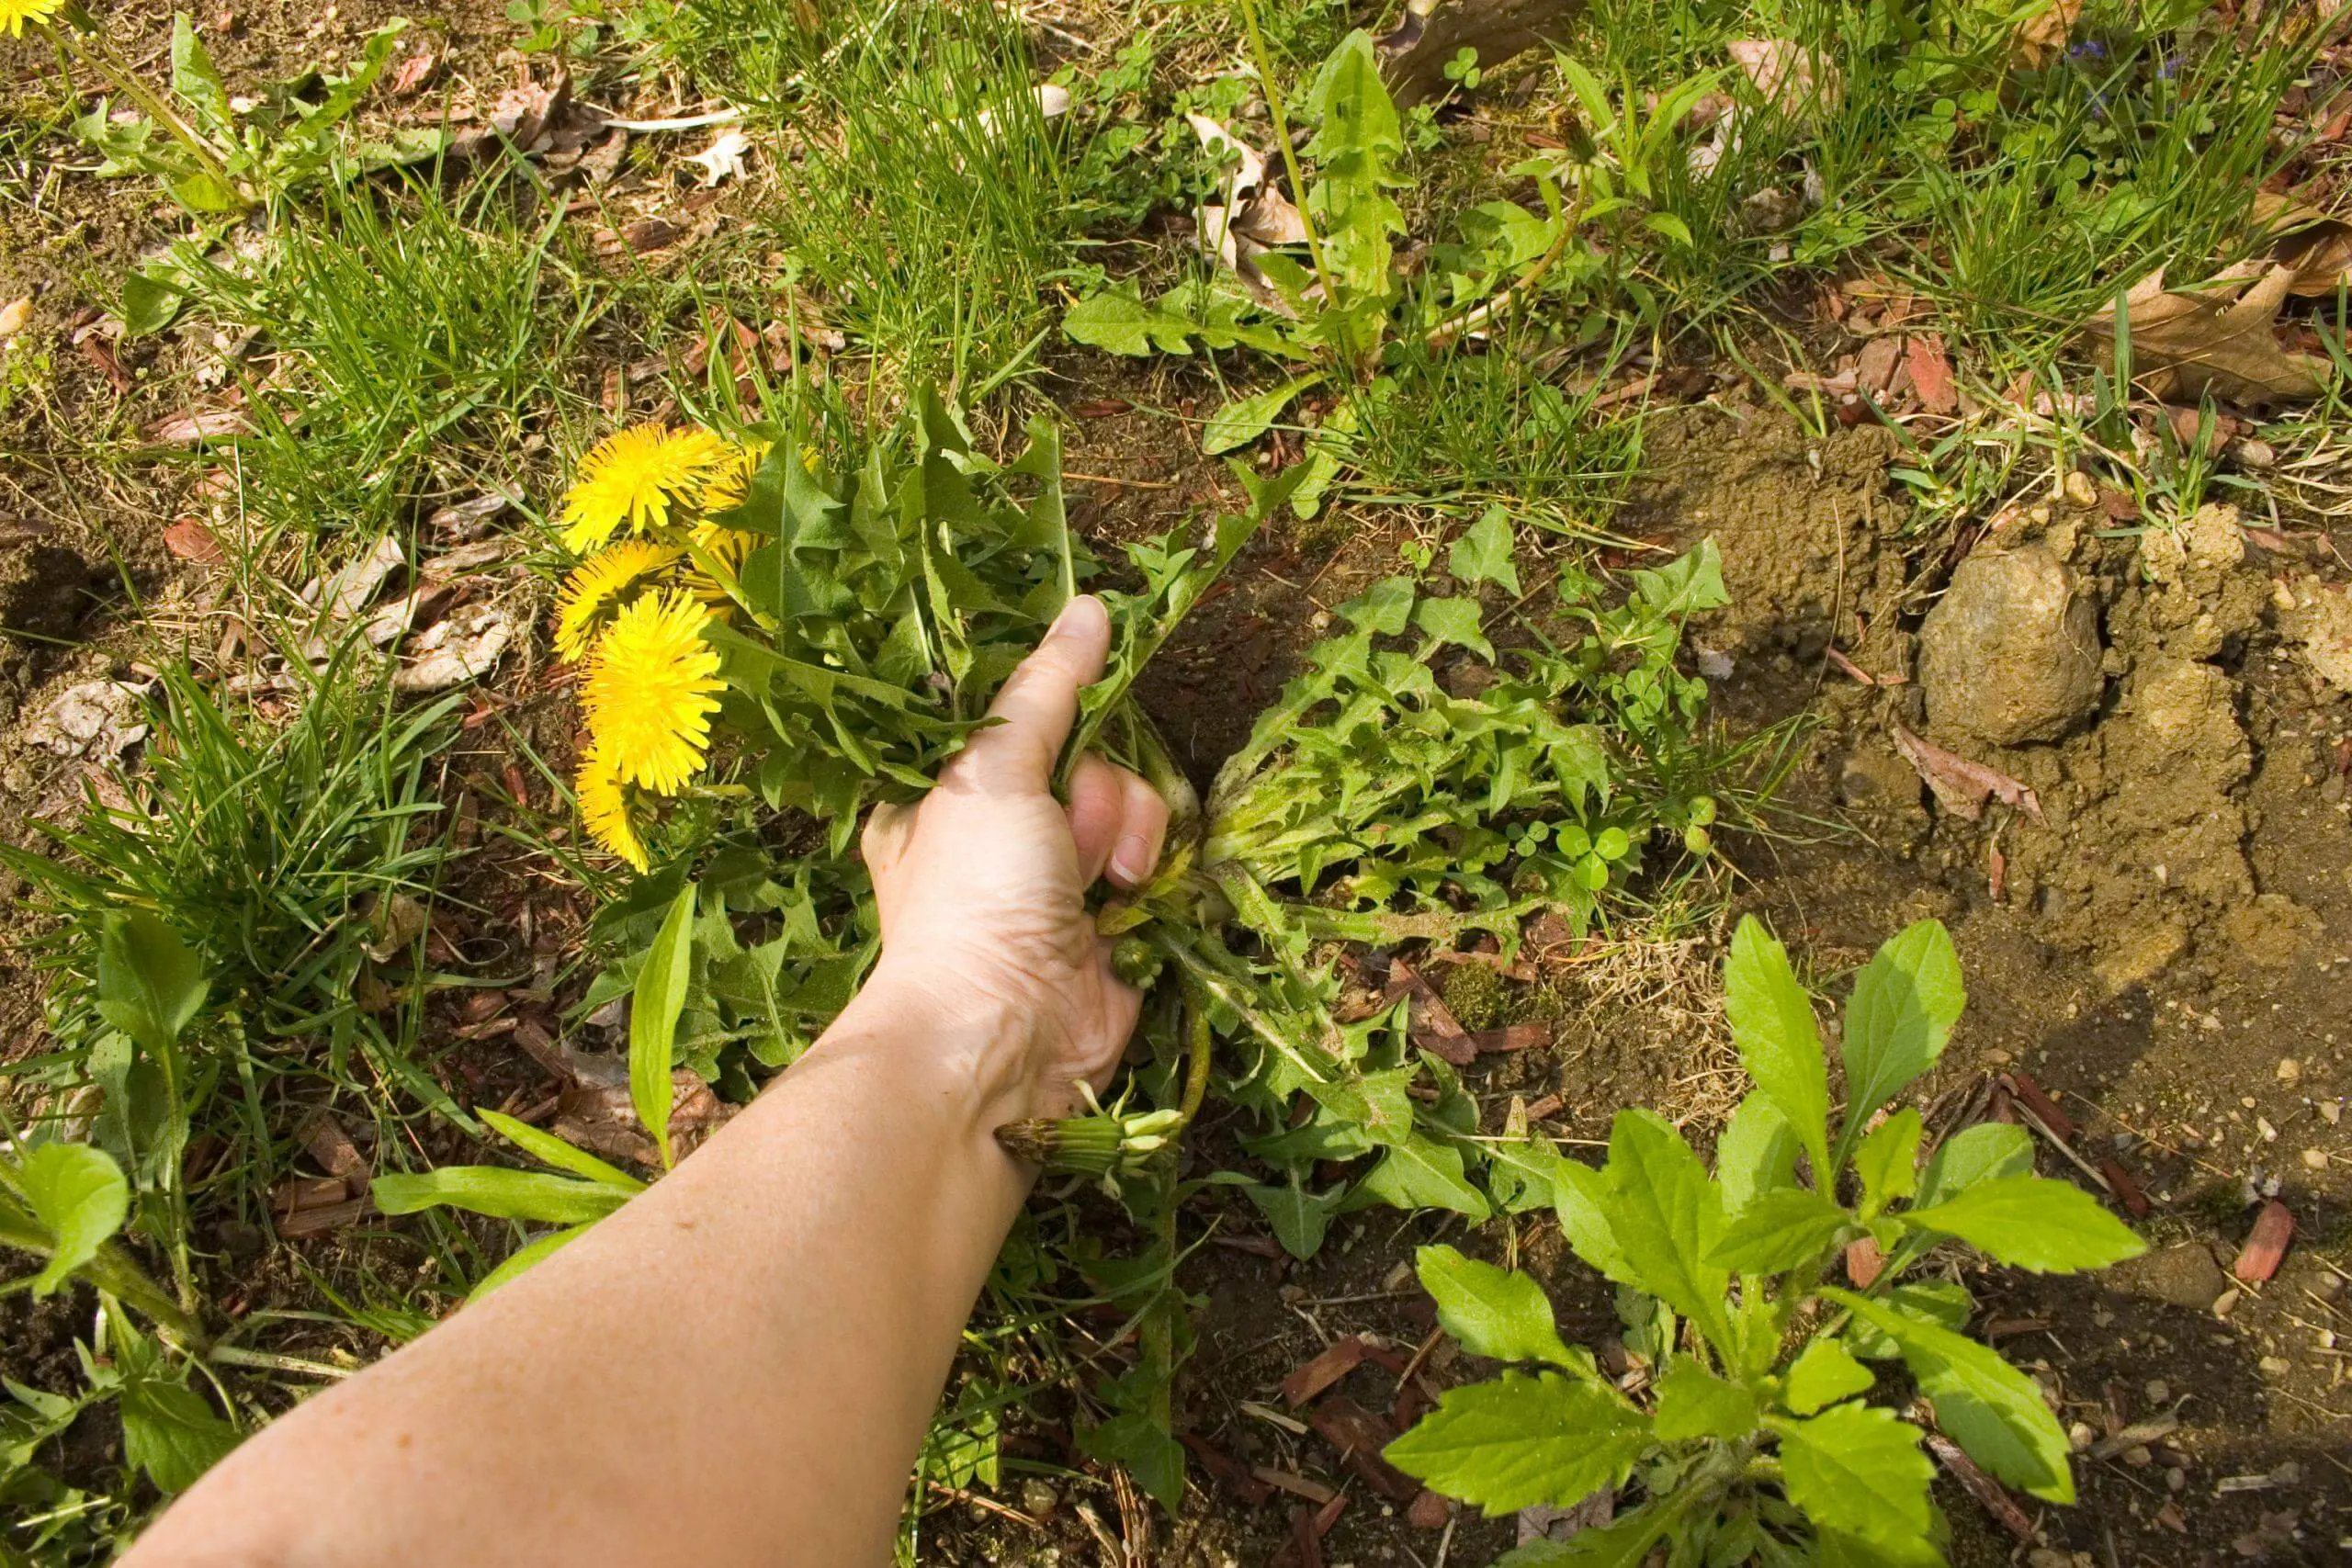 Removing dandelion weeds from your garden